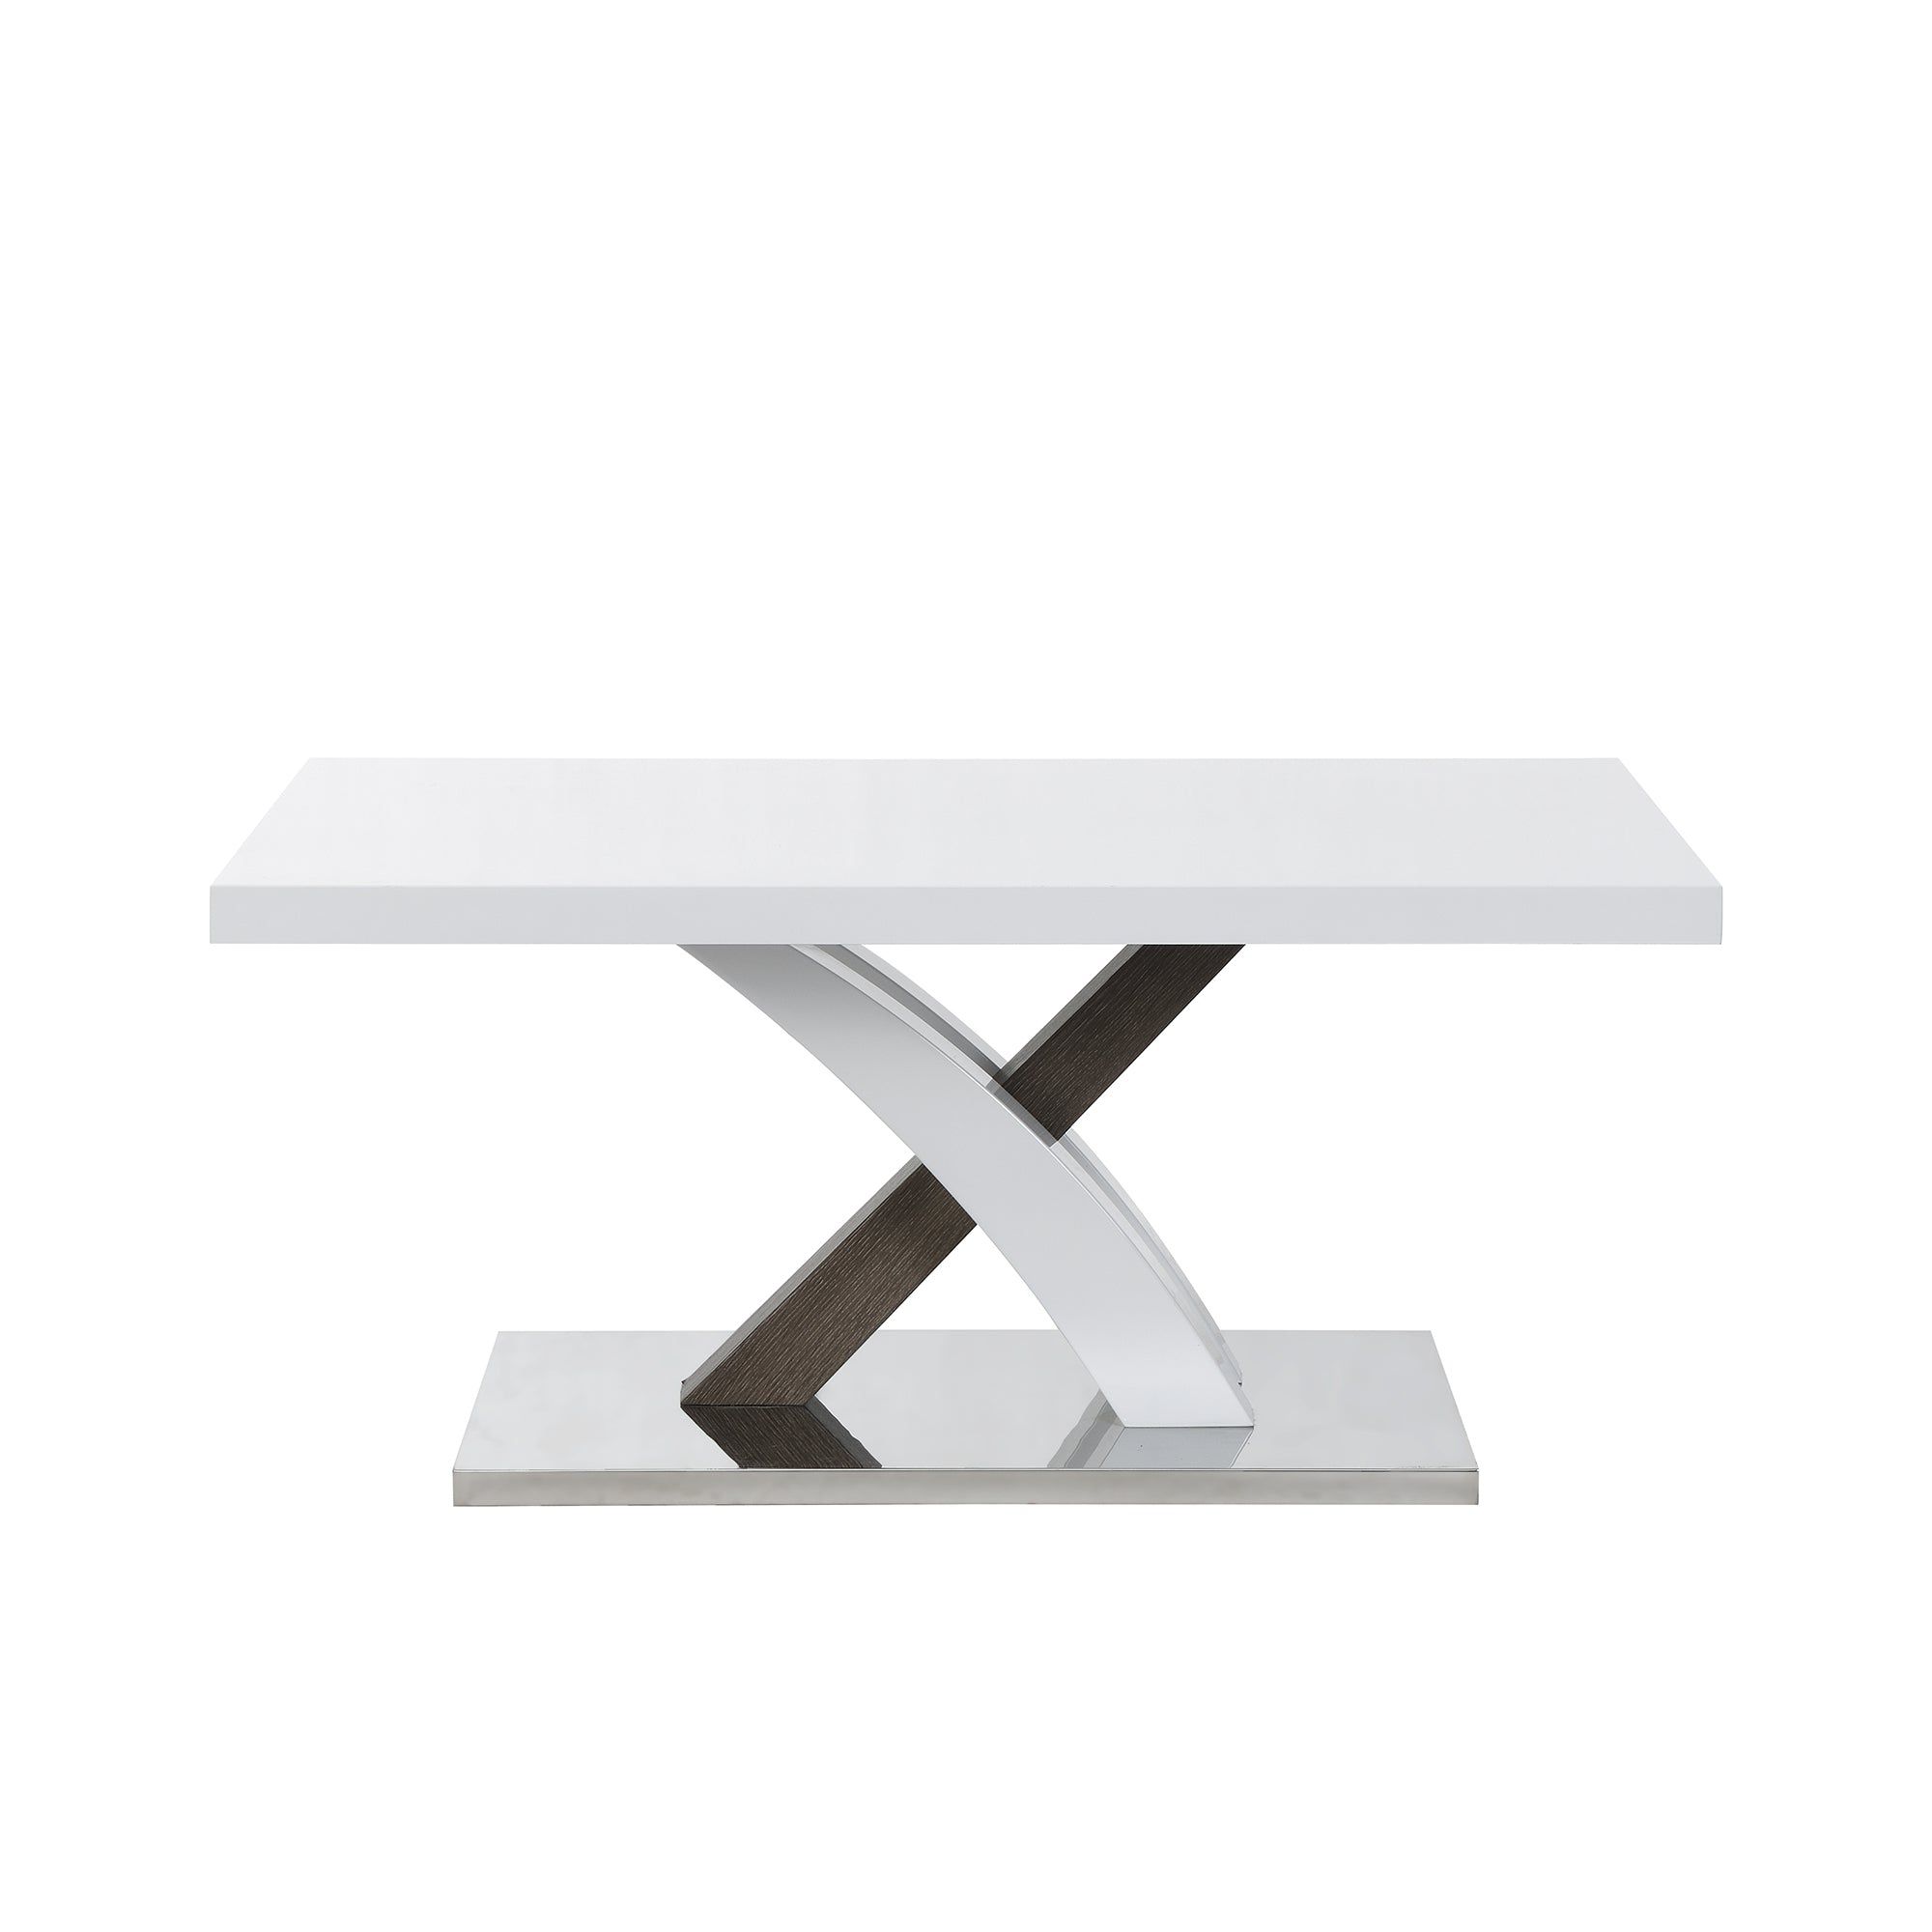 Glossy Finished Metal Coffee Tables Pertaining To Most Current Basel High Gloss White Coffee Table With Stainless Steel Base  (View 11 of 15)